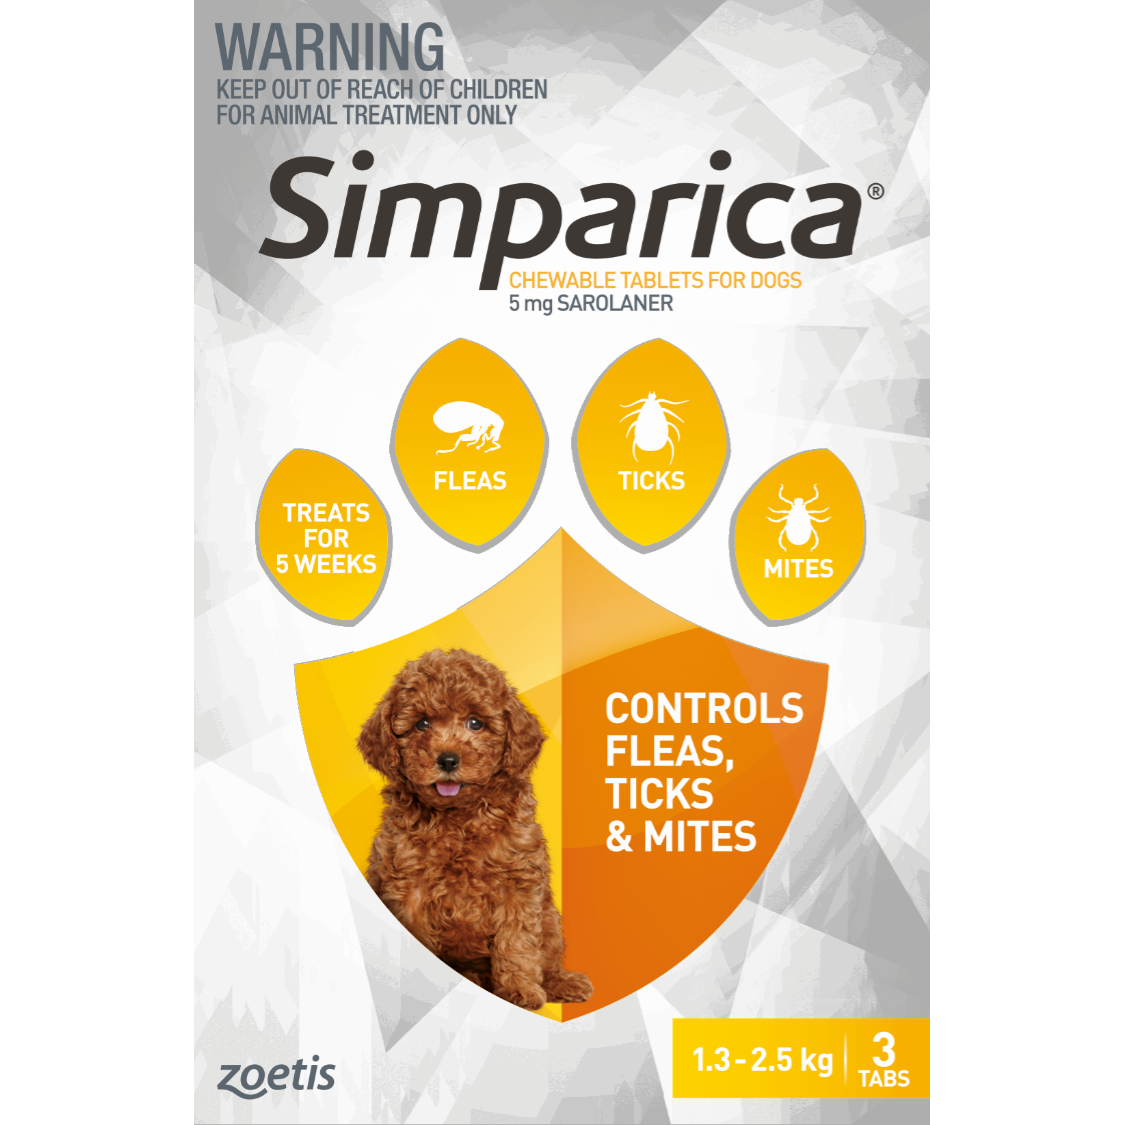 Simparica Chewable Tablets for Dogs 1.3-2.5kg